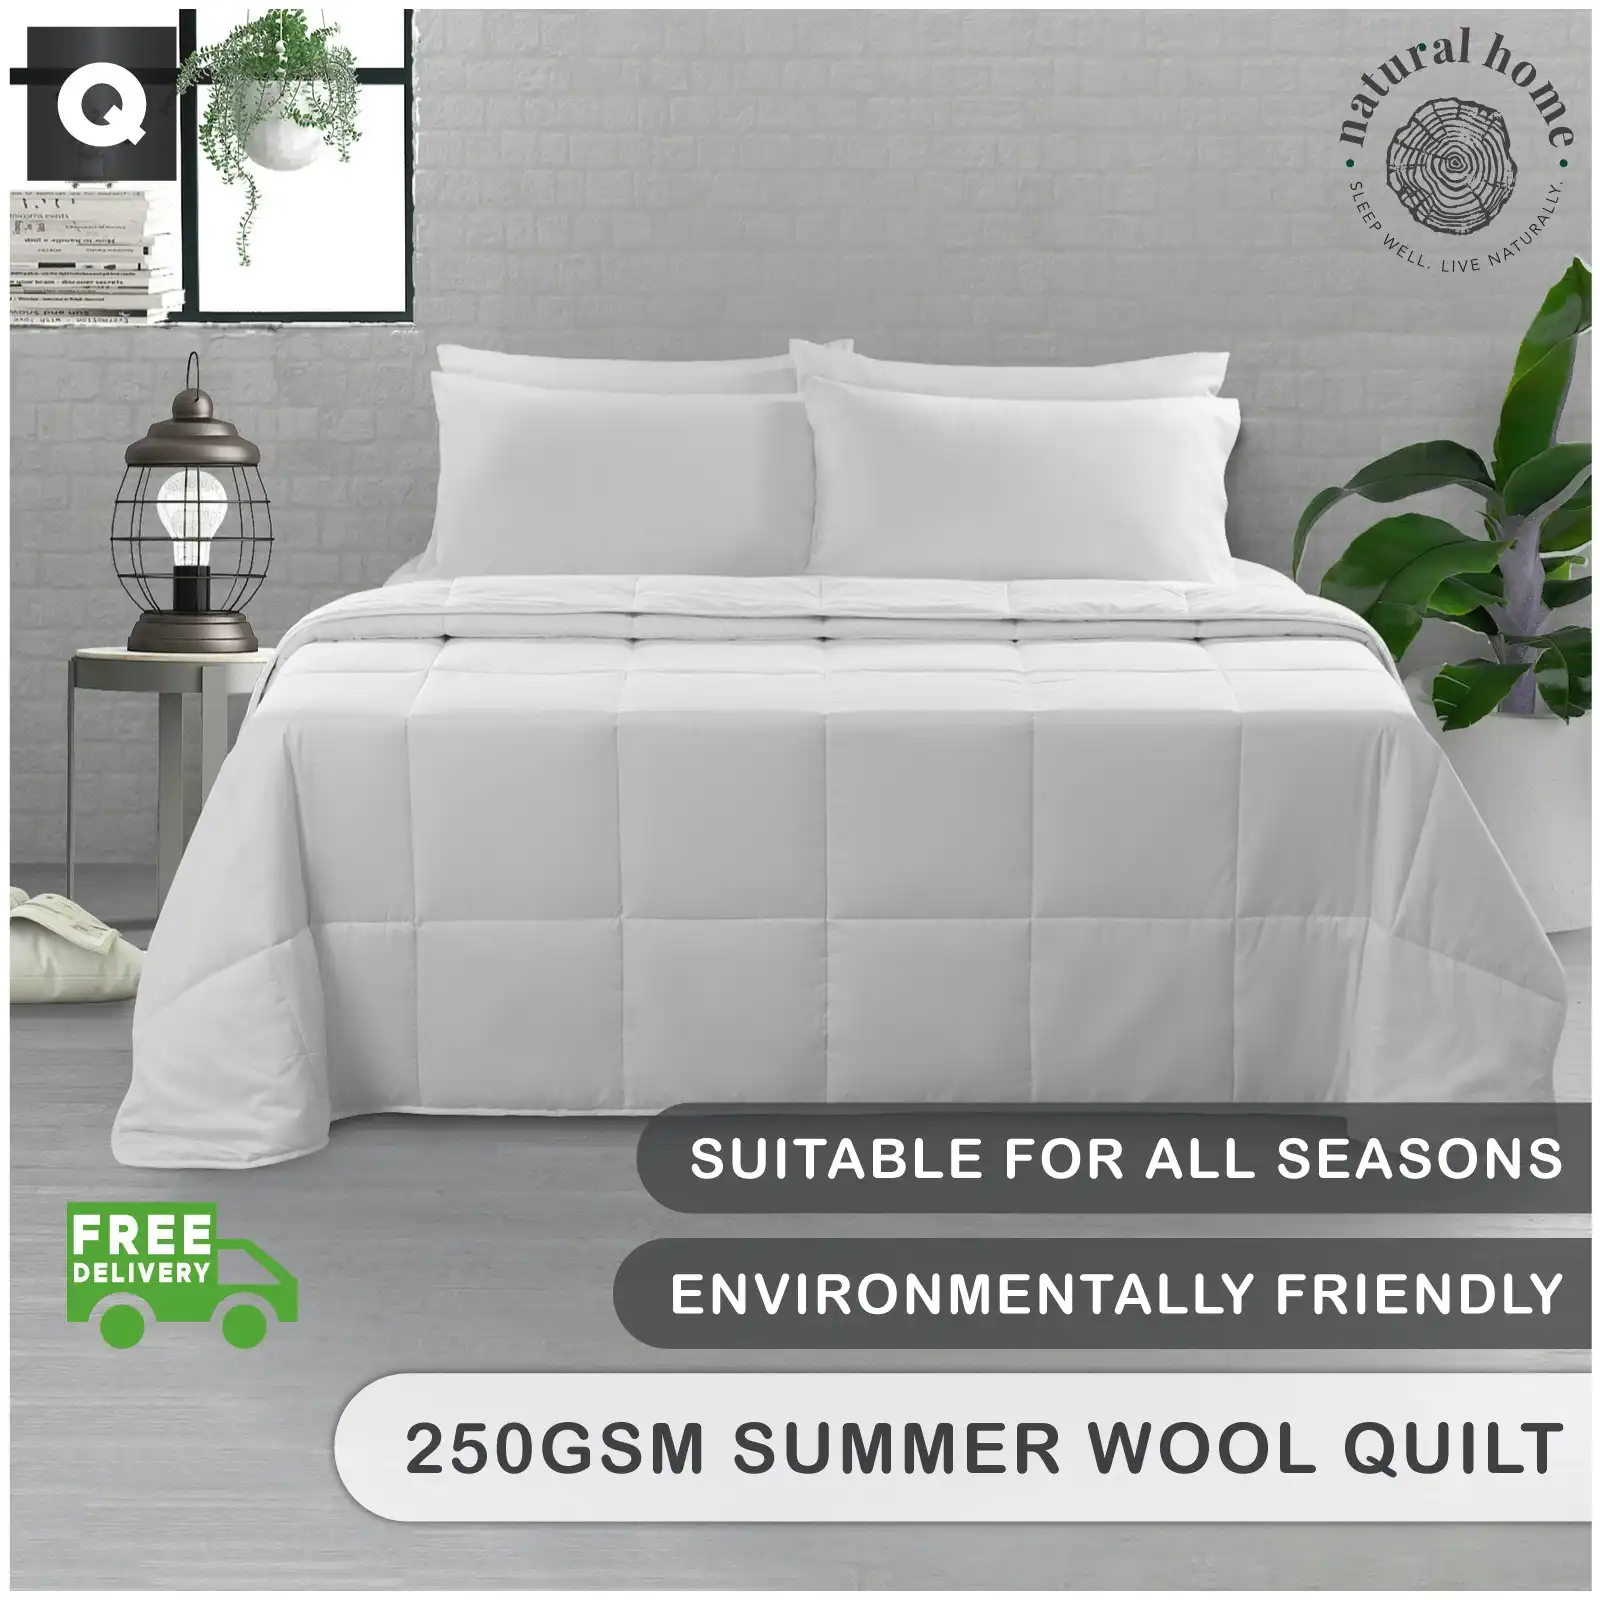 Natural Home Summer Wool Quilt 250gsm - White - Queen Bed